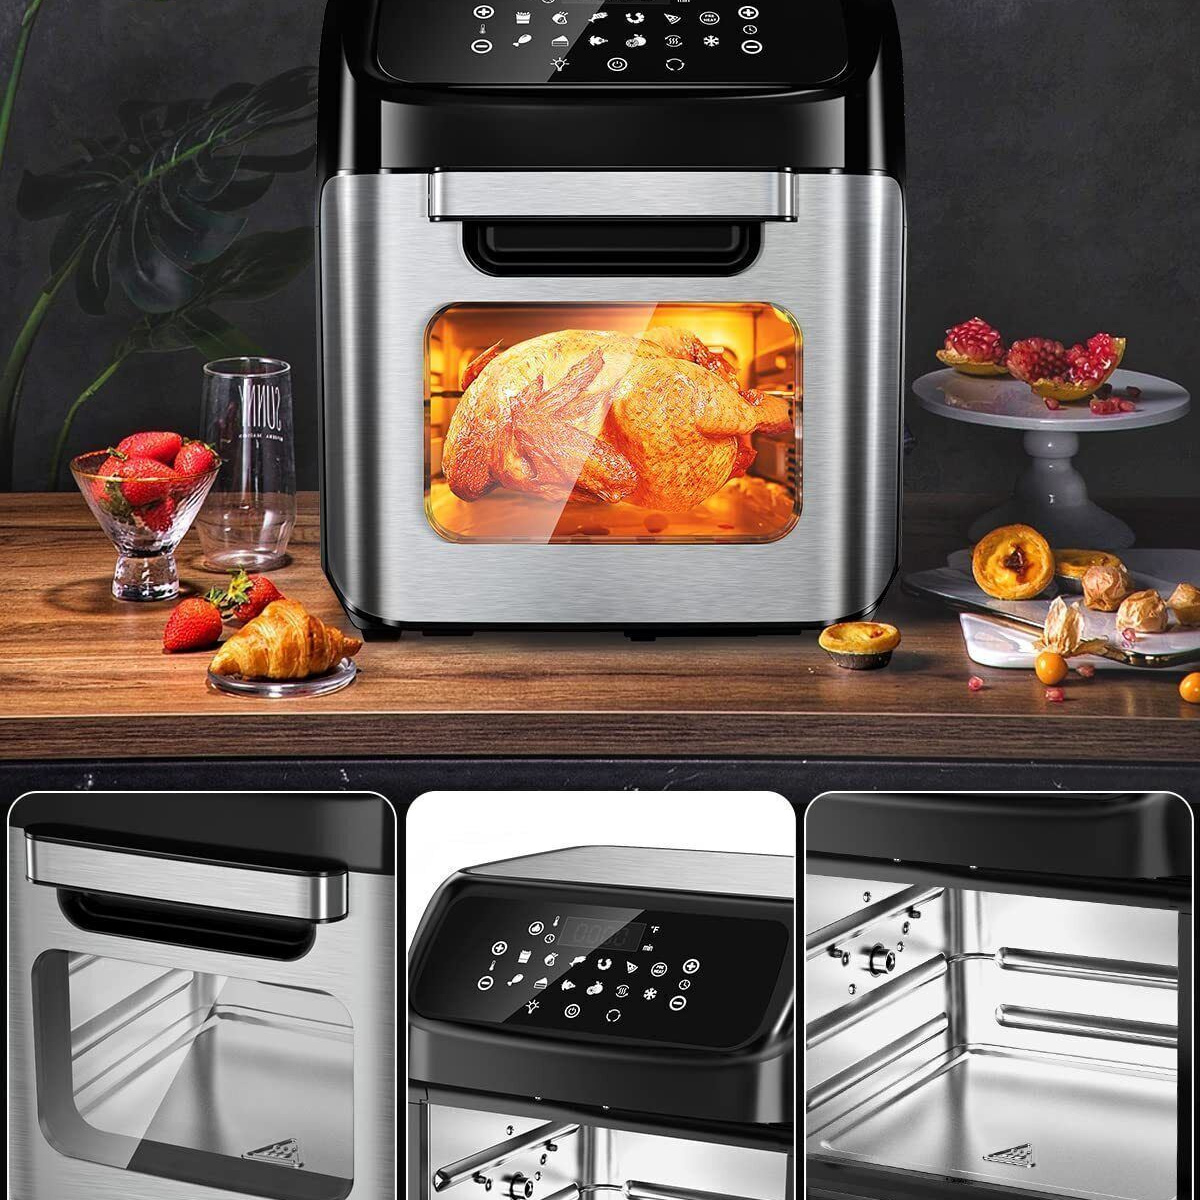 12LT, air fryer, convection oven, rotisserie, 1800w, touch display, ROYALTY LINE AFO1206, black-silver